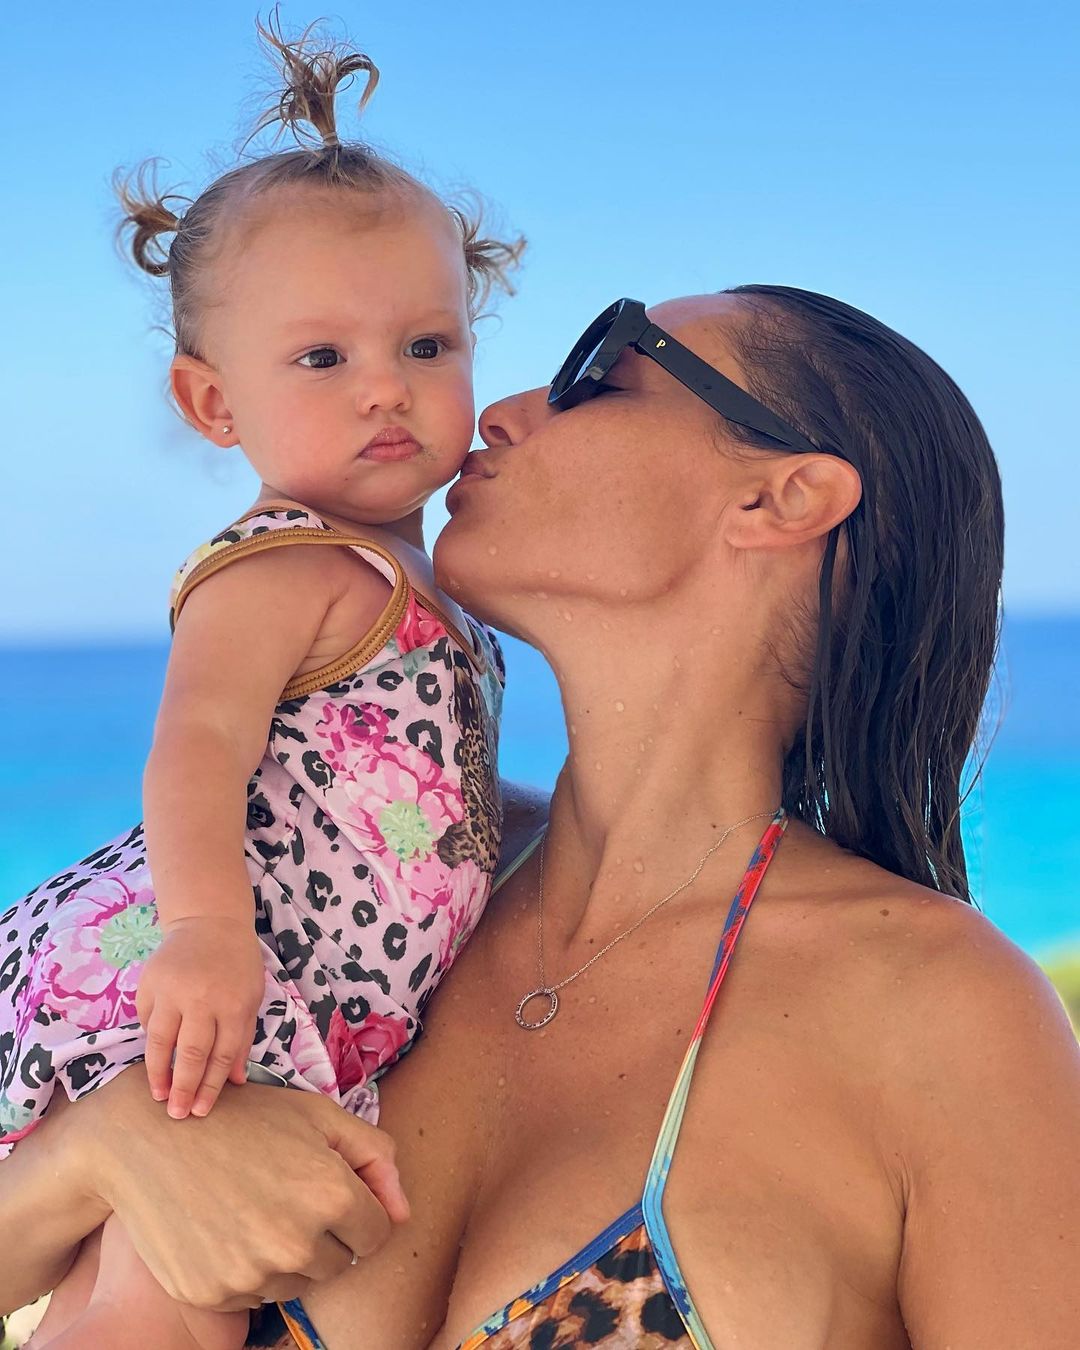 Little Ana turned one year old in Ibiza and when they returned to Argentina they returned to celebrate as a family with her father, Roberto García Moritán